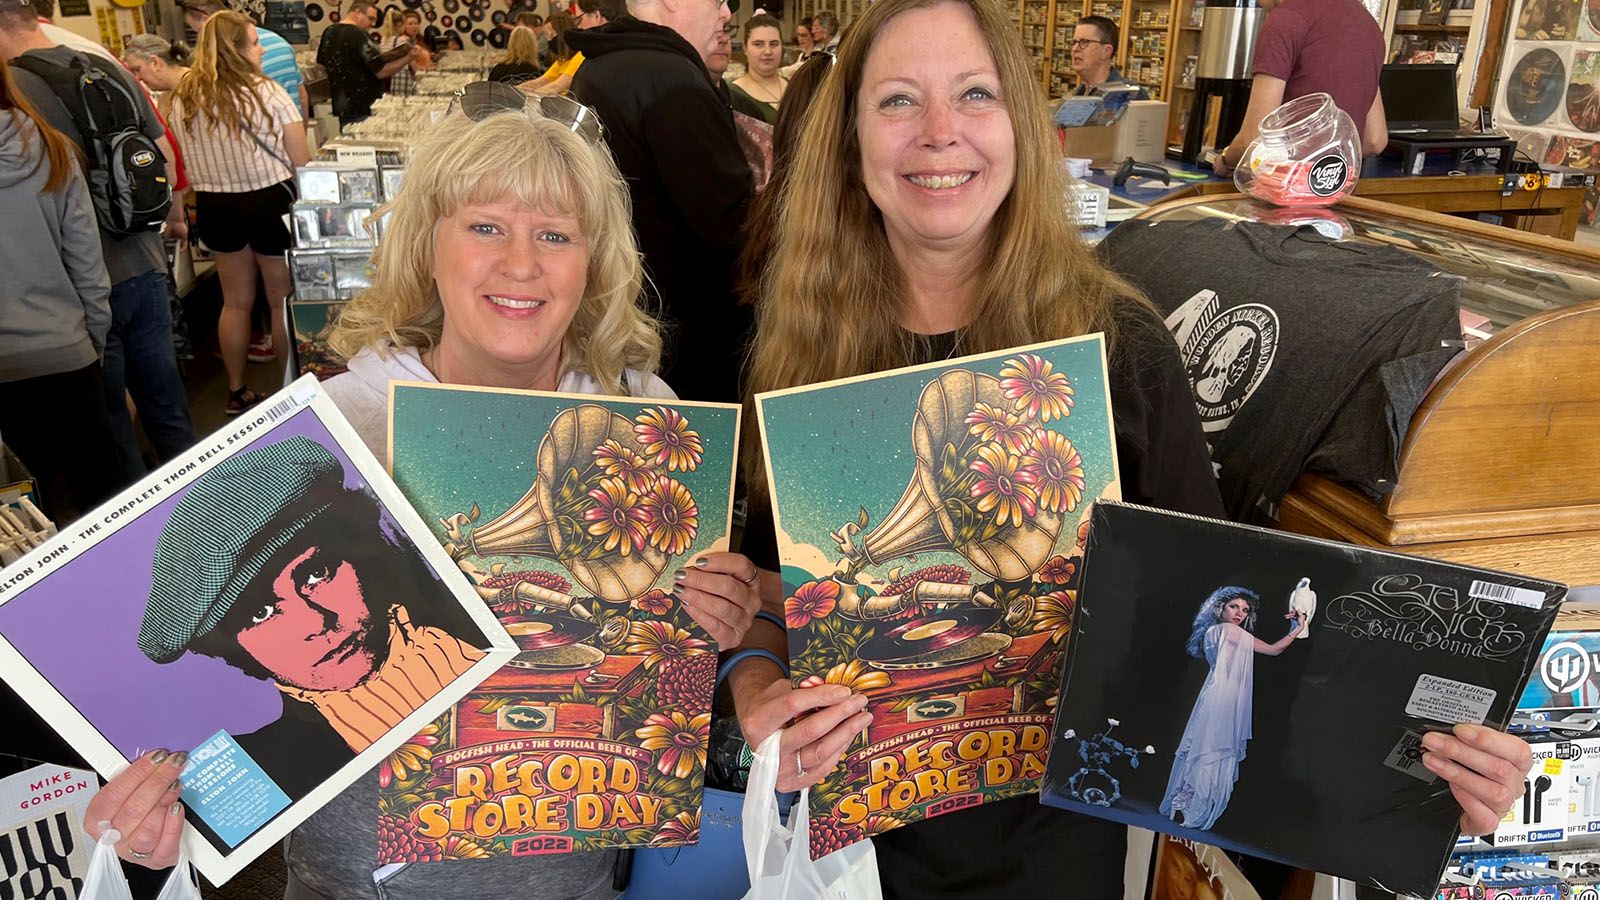 Vinyl fans will again gather for Record Store Day on April 22.